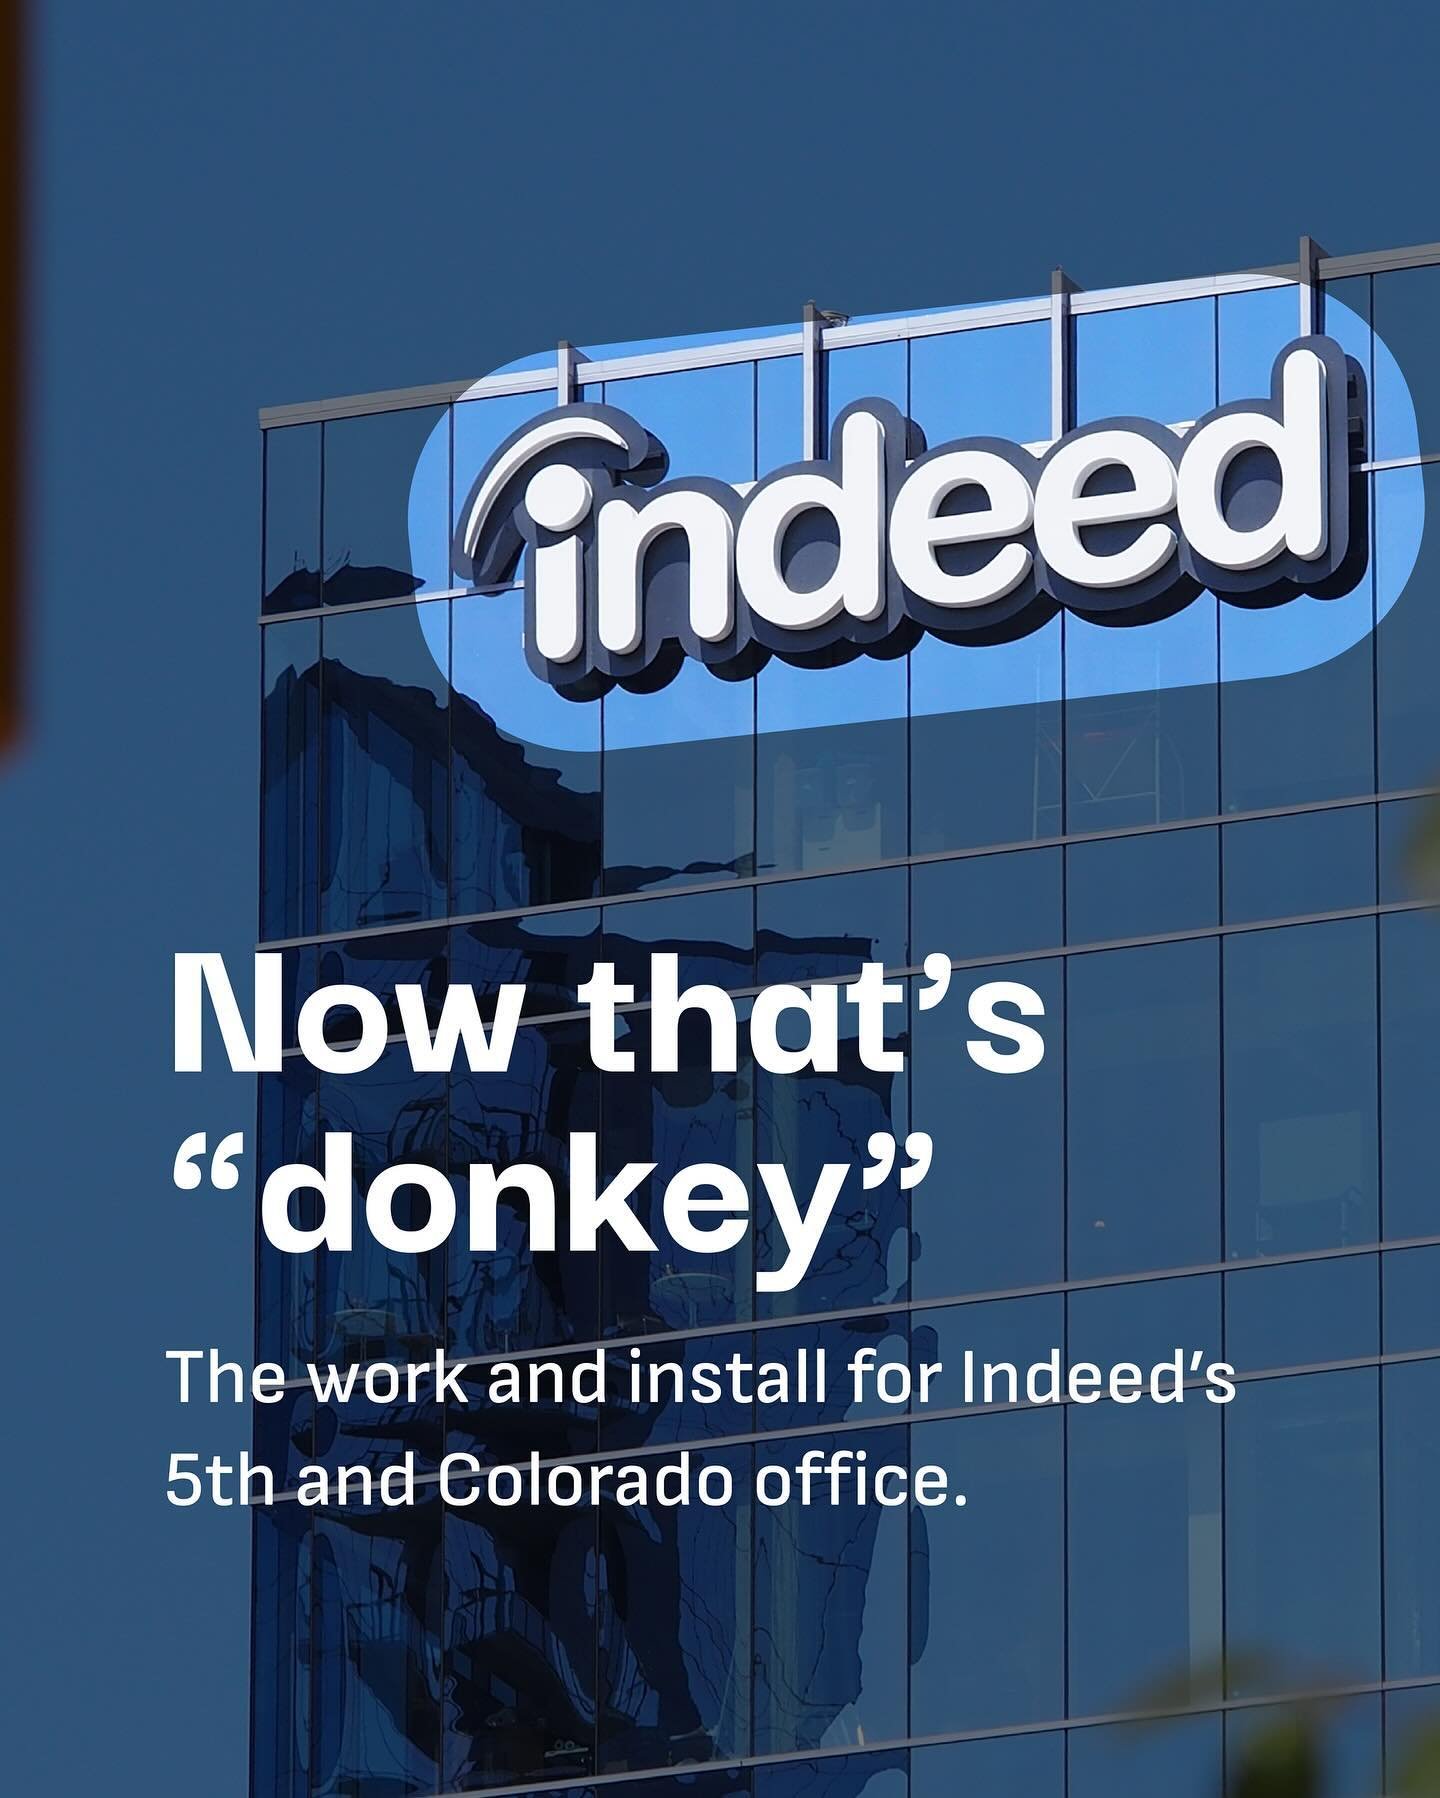 A colossal sign project, &ldquo;Indeed&rdquo;! Our sign design expertise was needed to make this big ole sign and its elevated installation, a donkey-sized success! From brainstorming concepts and design directions to meticulously toiling over how to